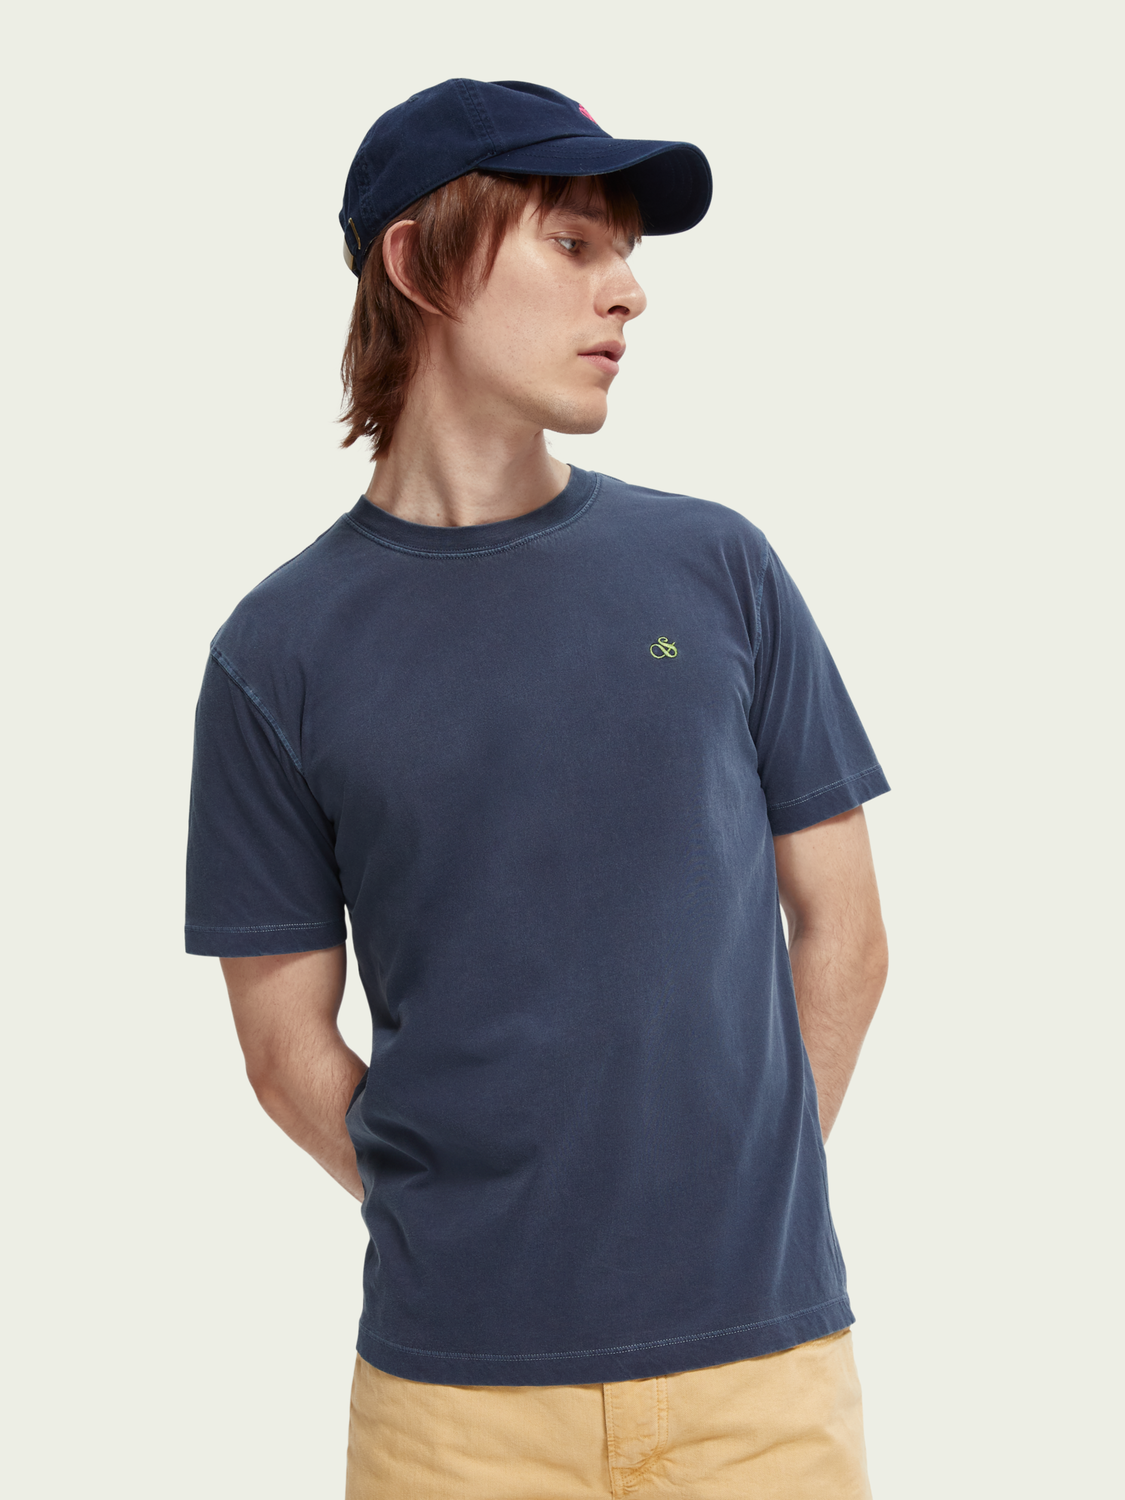 T-shirt teint - Washed Navy